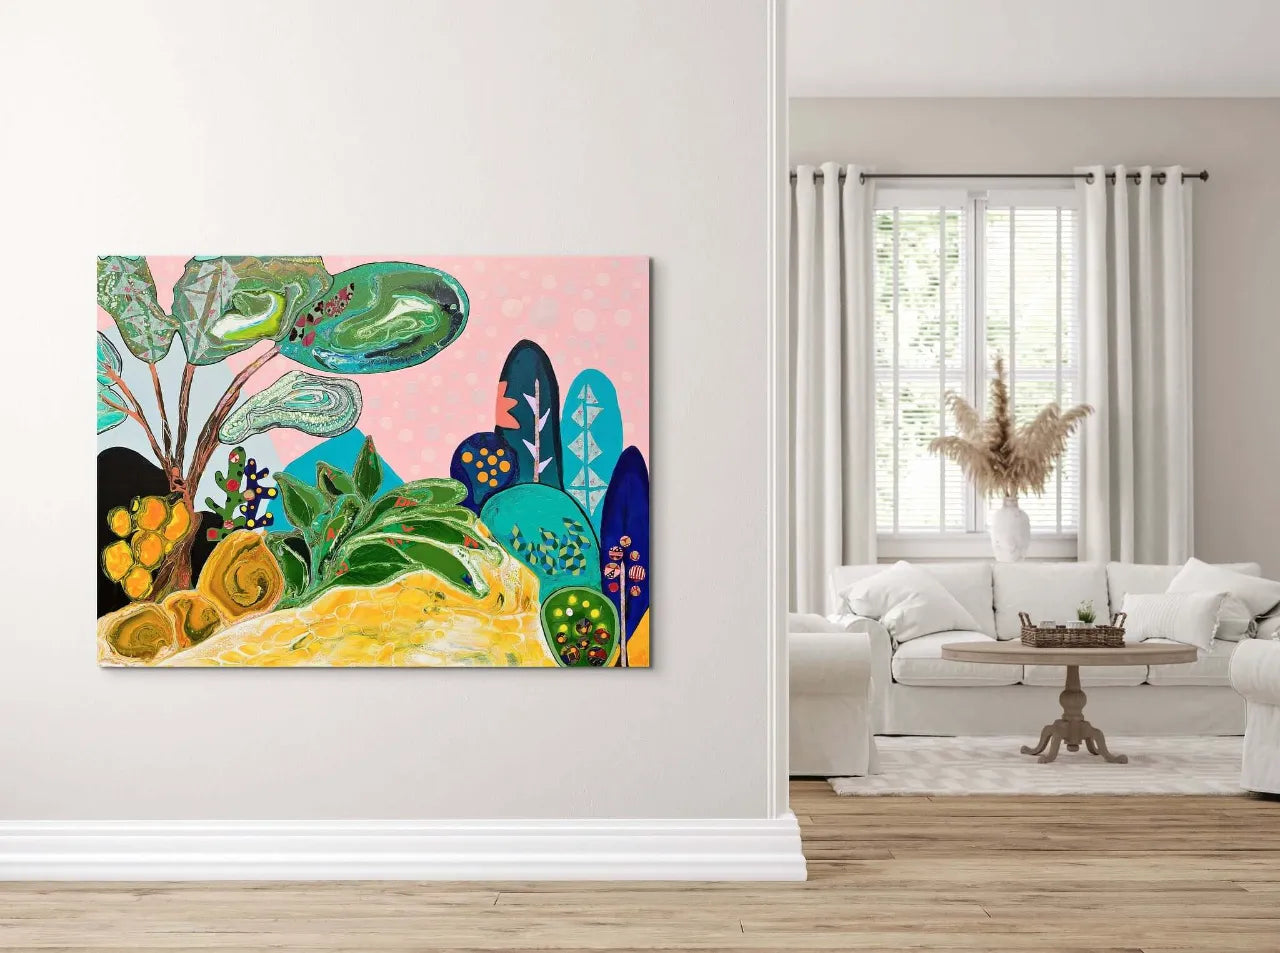    Abstract-Artwork-by-Sung-Lee-Nature-Series-Forest-Wonderland-Hallway-Chromaluxe-Limited-Edition-Print